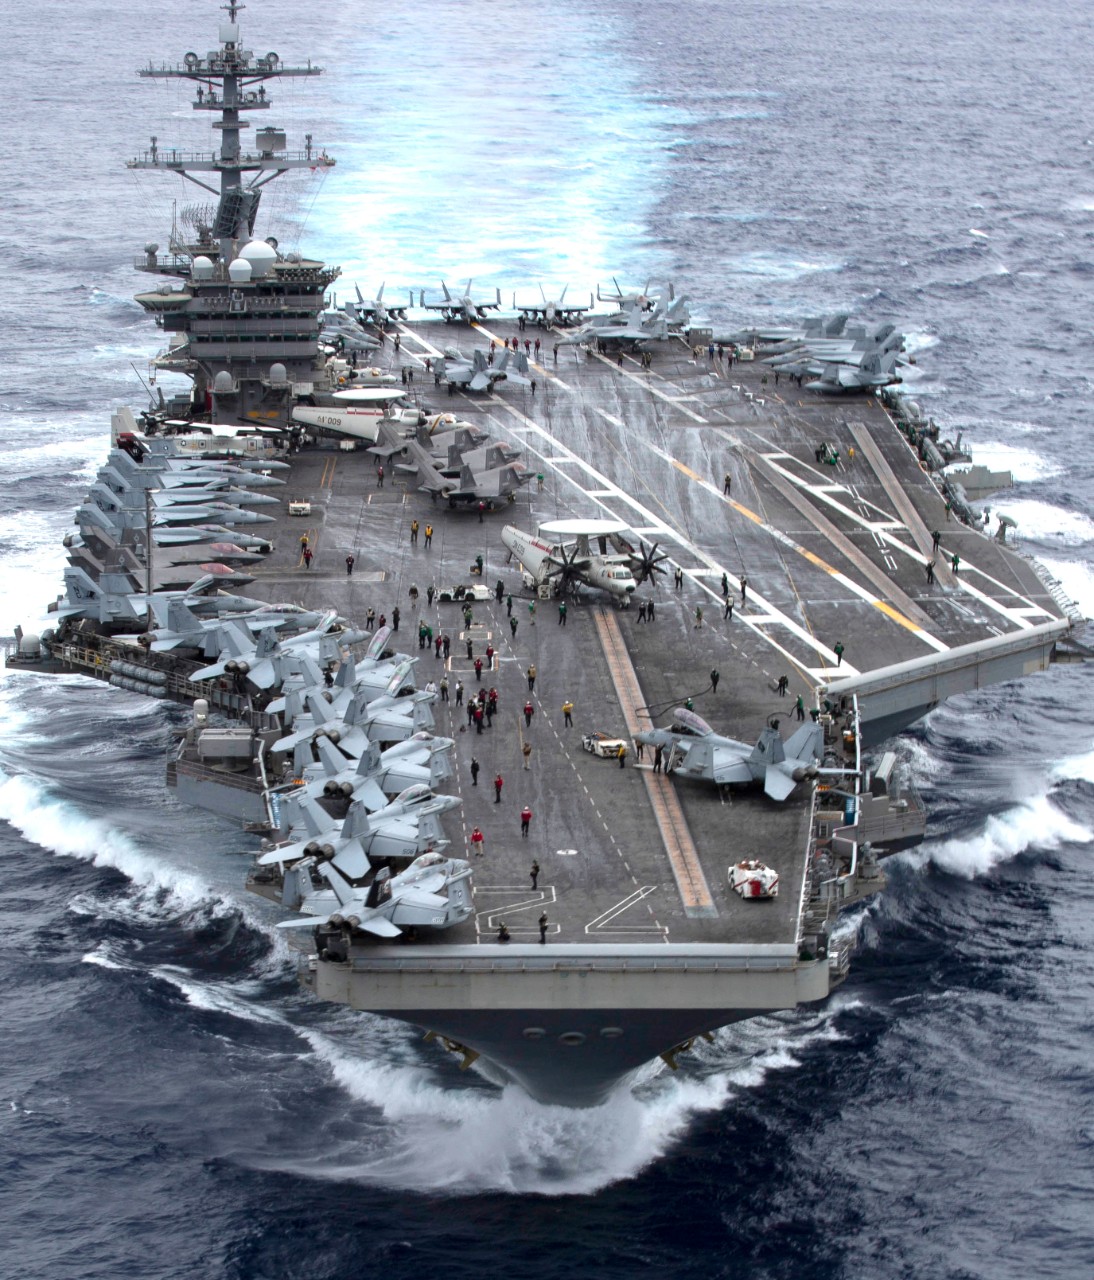 PACIFIC OCEAN (Jan. 8, 2022) The aircraft carrier USS Abraham Lincoln (CVN 72) transits the Pacific Ocean. The Abraham Lincoln Carrier Strike Group, led by Carrier Strike Group 3, deployed from San Diego, Jan. 3, in support of global maritime sec...